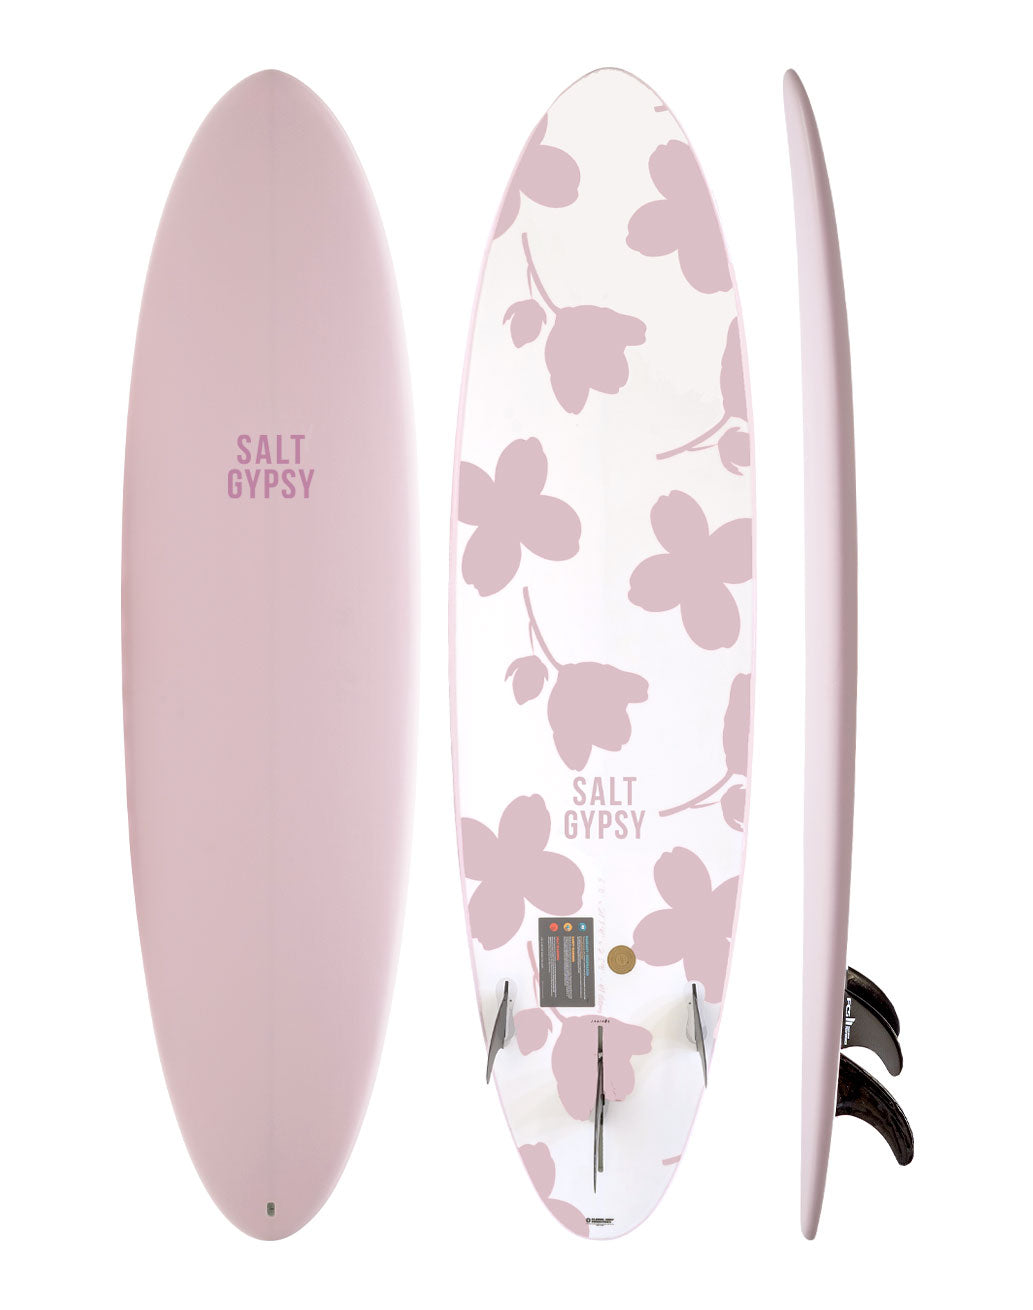 Salt Gypsy Surfboards Mid Tide - pink and white floral mid length soft surfboard